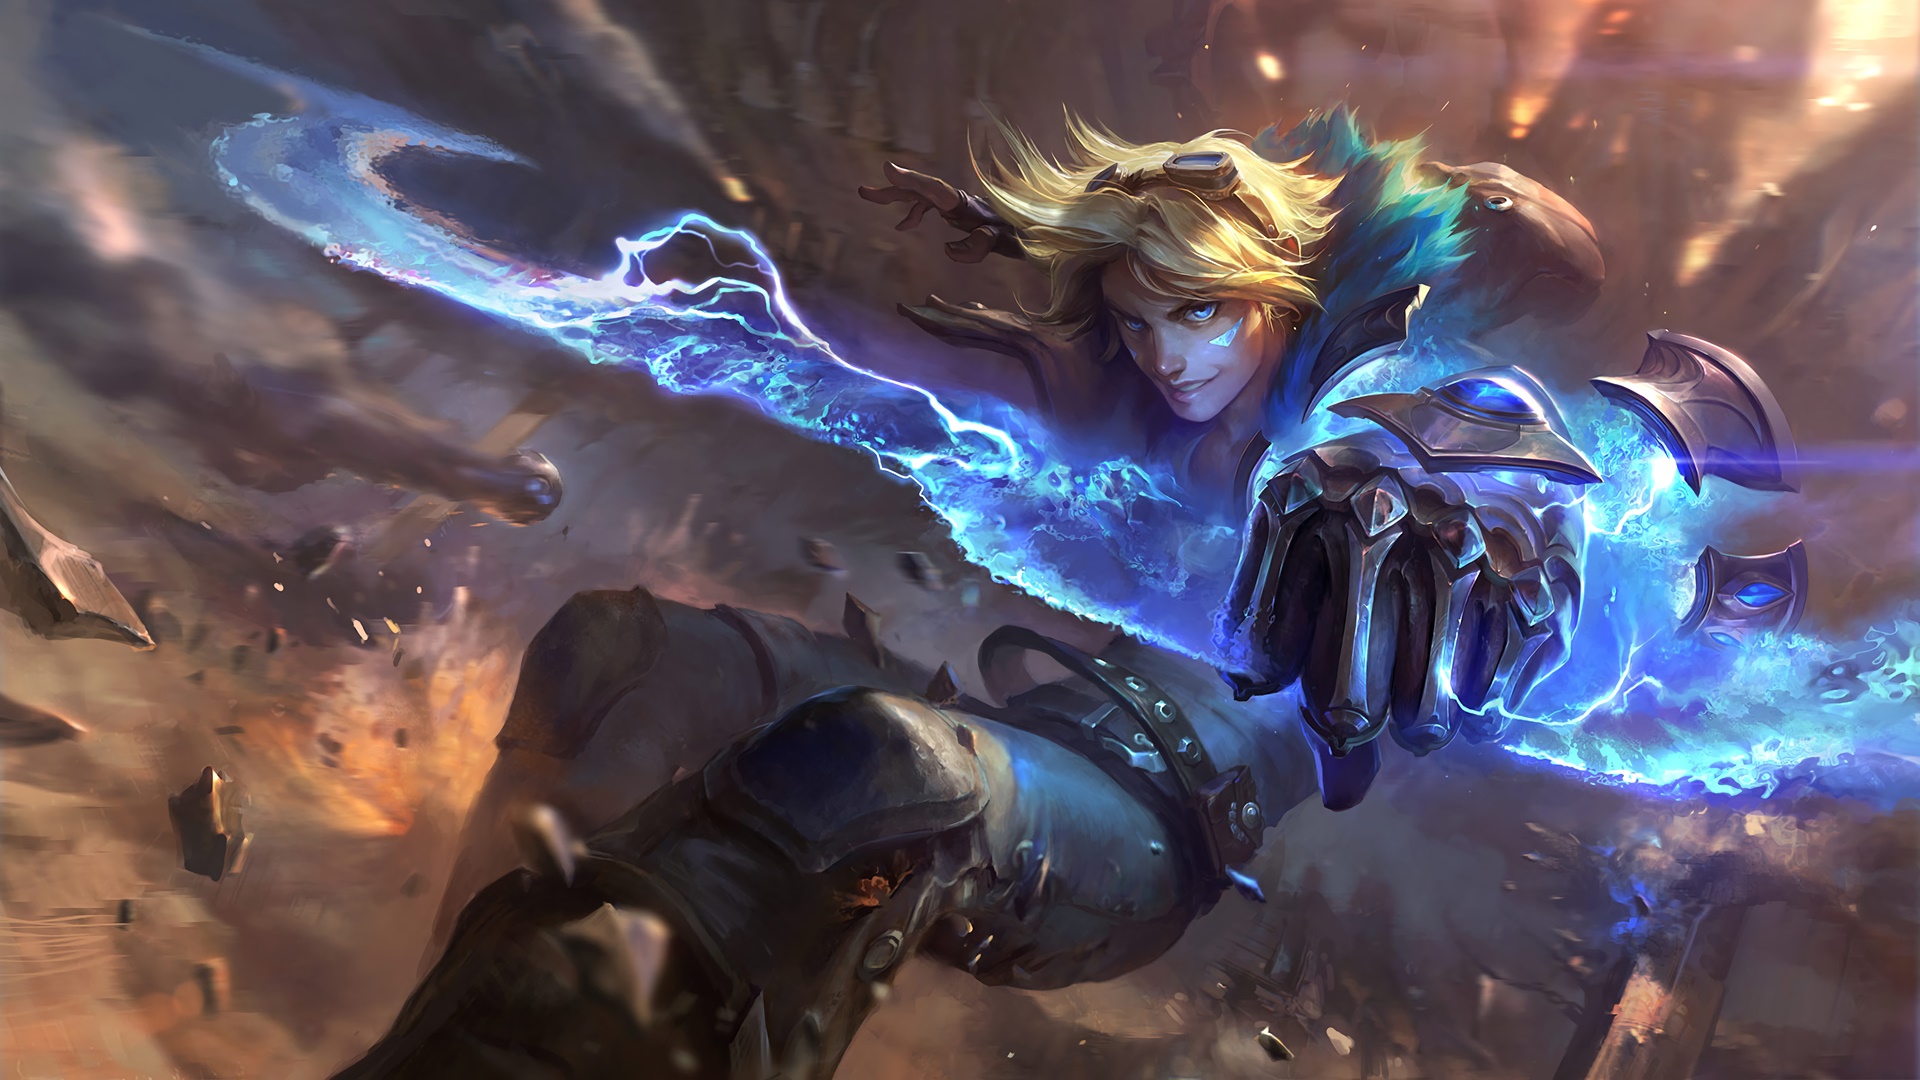 A decade later, League of Legends is yet to turn a profit as an esport